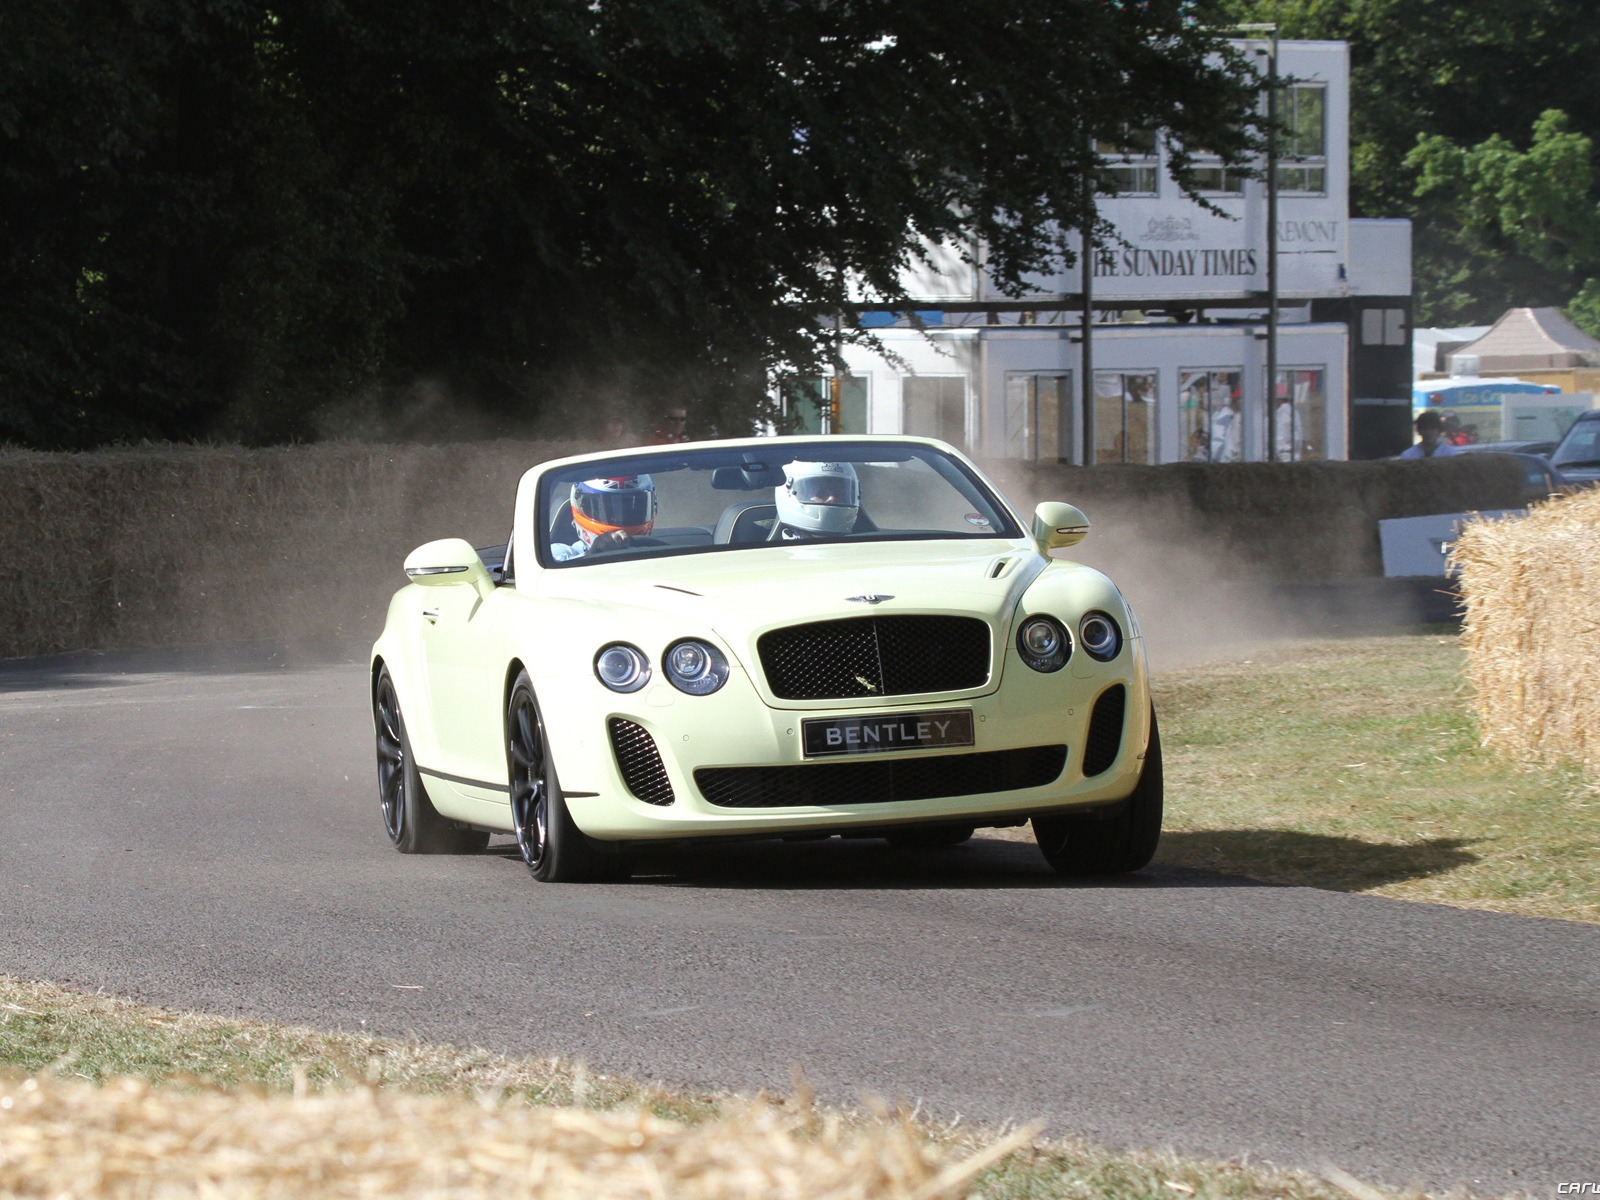 Bentley Continental Supersports Convertible - 2010 宾利23 - 1600x1200